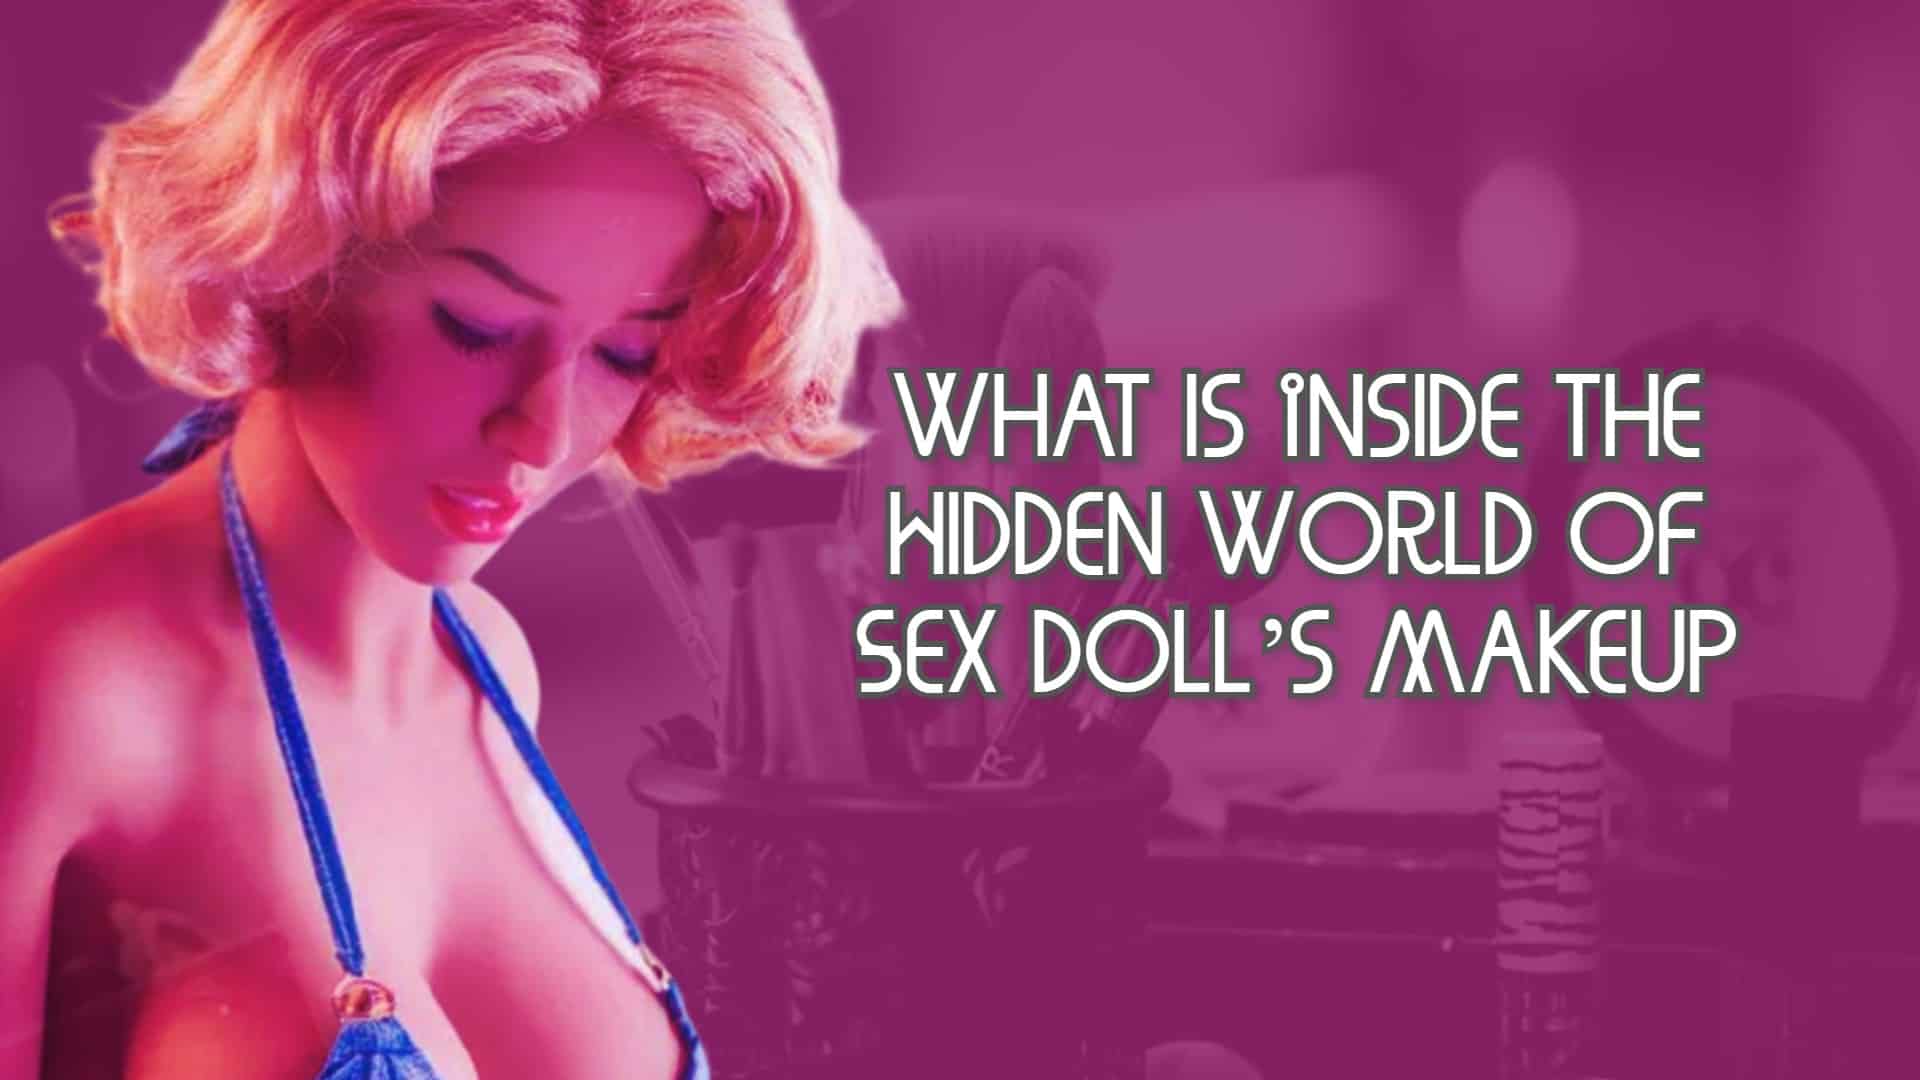 What is Inside the Hidden World of Sex Doll’s Makeup?